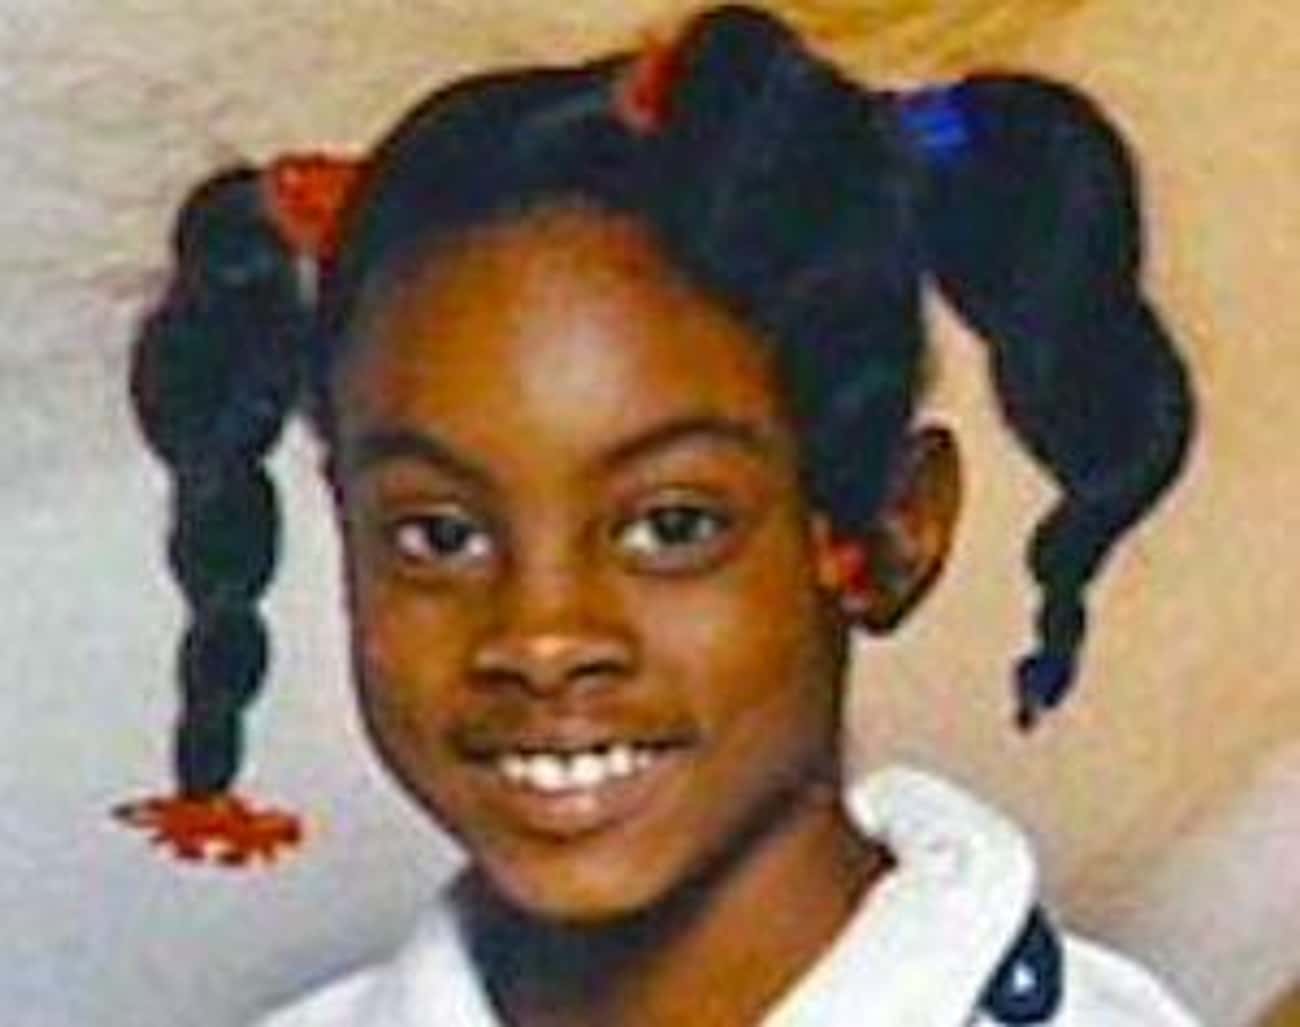 Asha Degree, Age 9, Packed Her Backpack, Walked Out Of Her House On A Rainy Night, And Vanished